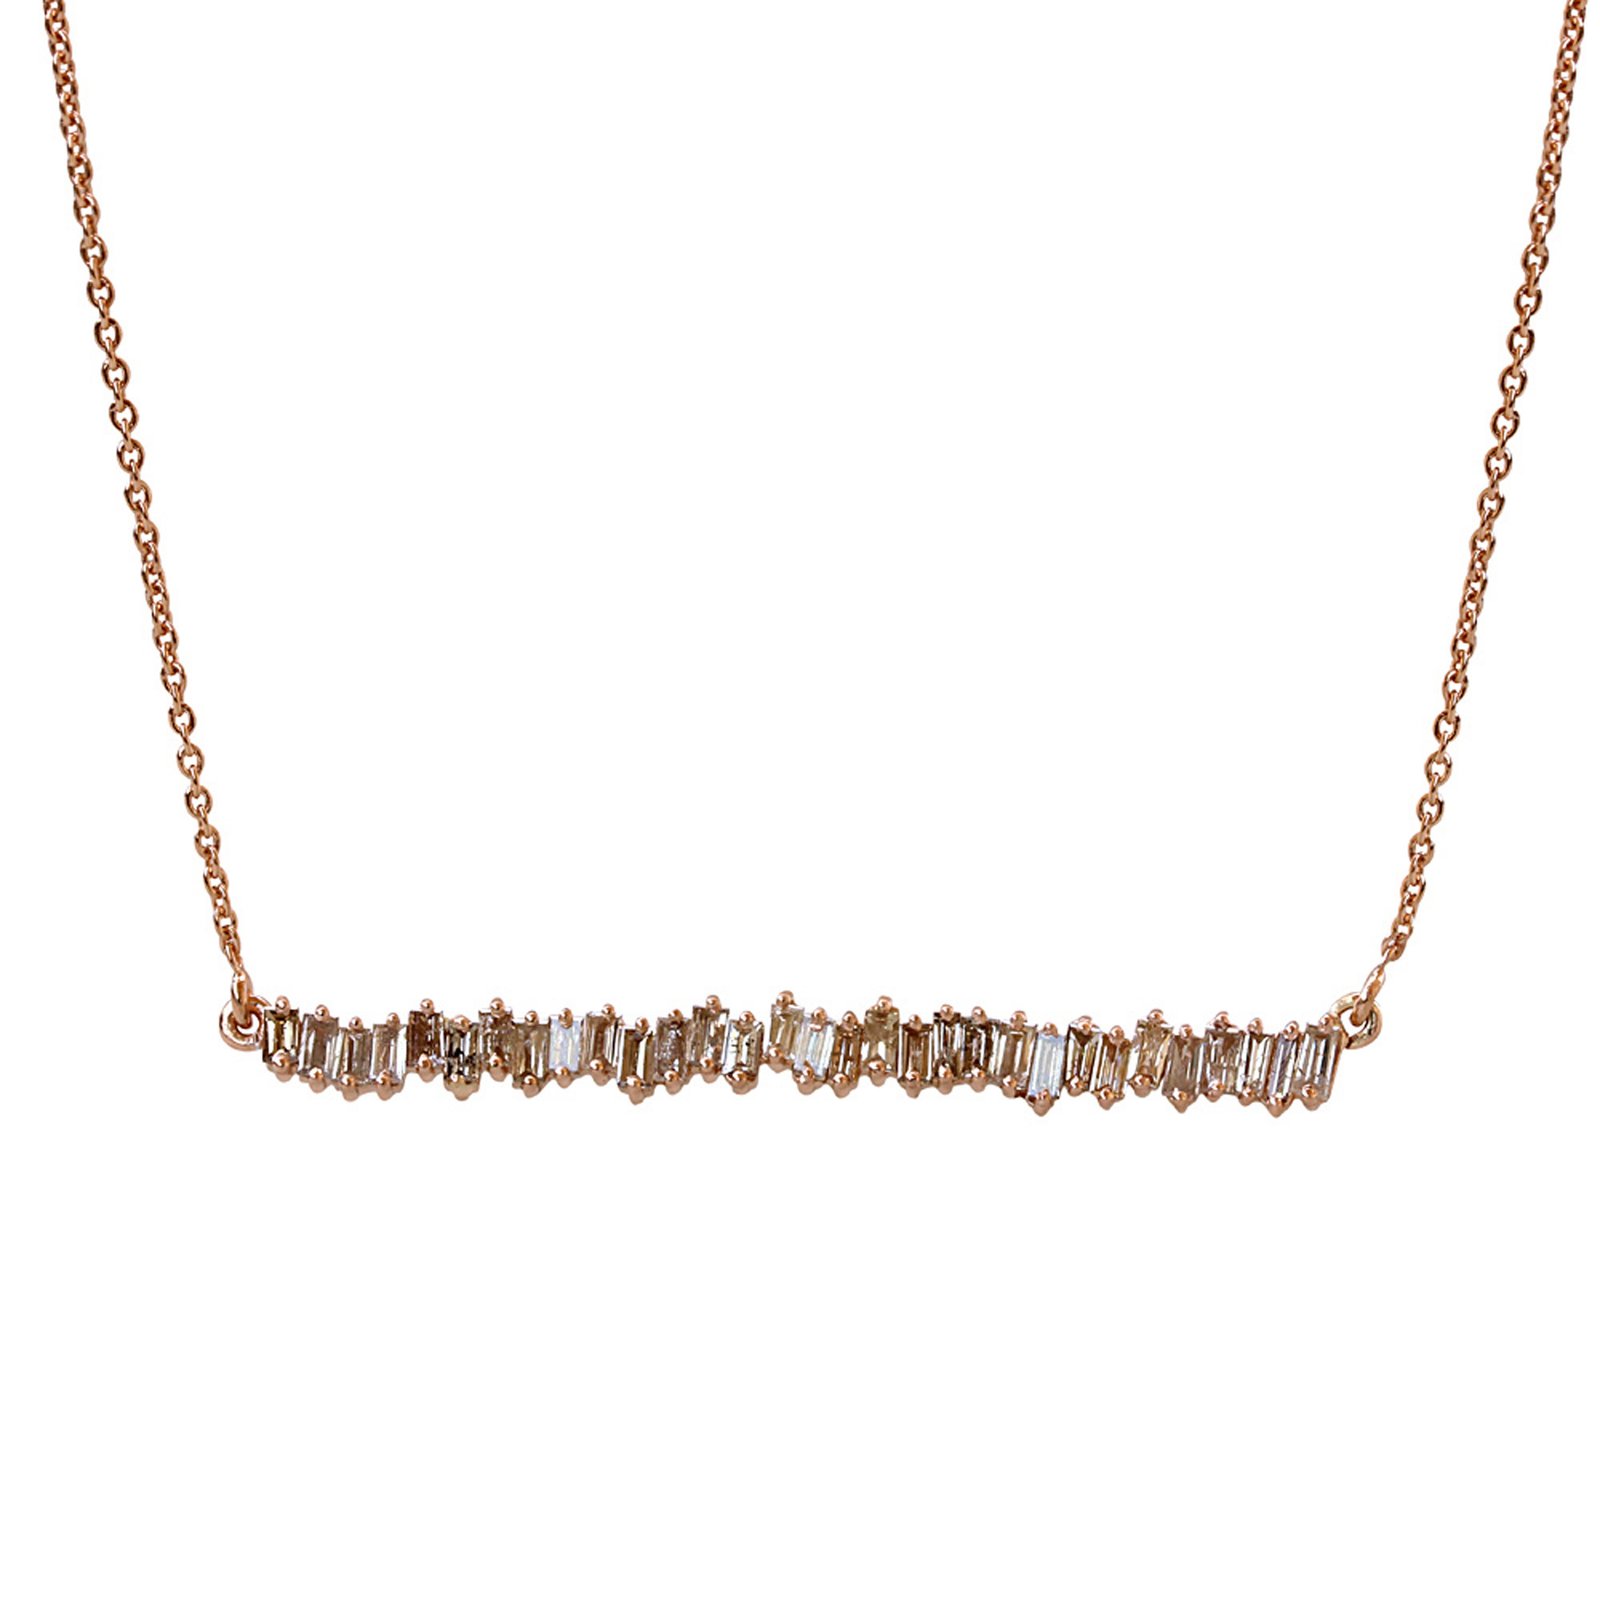 18k Solid gold baguette diamond necklace with chain